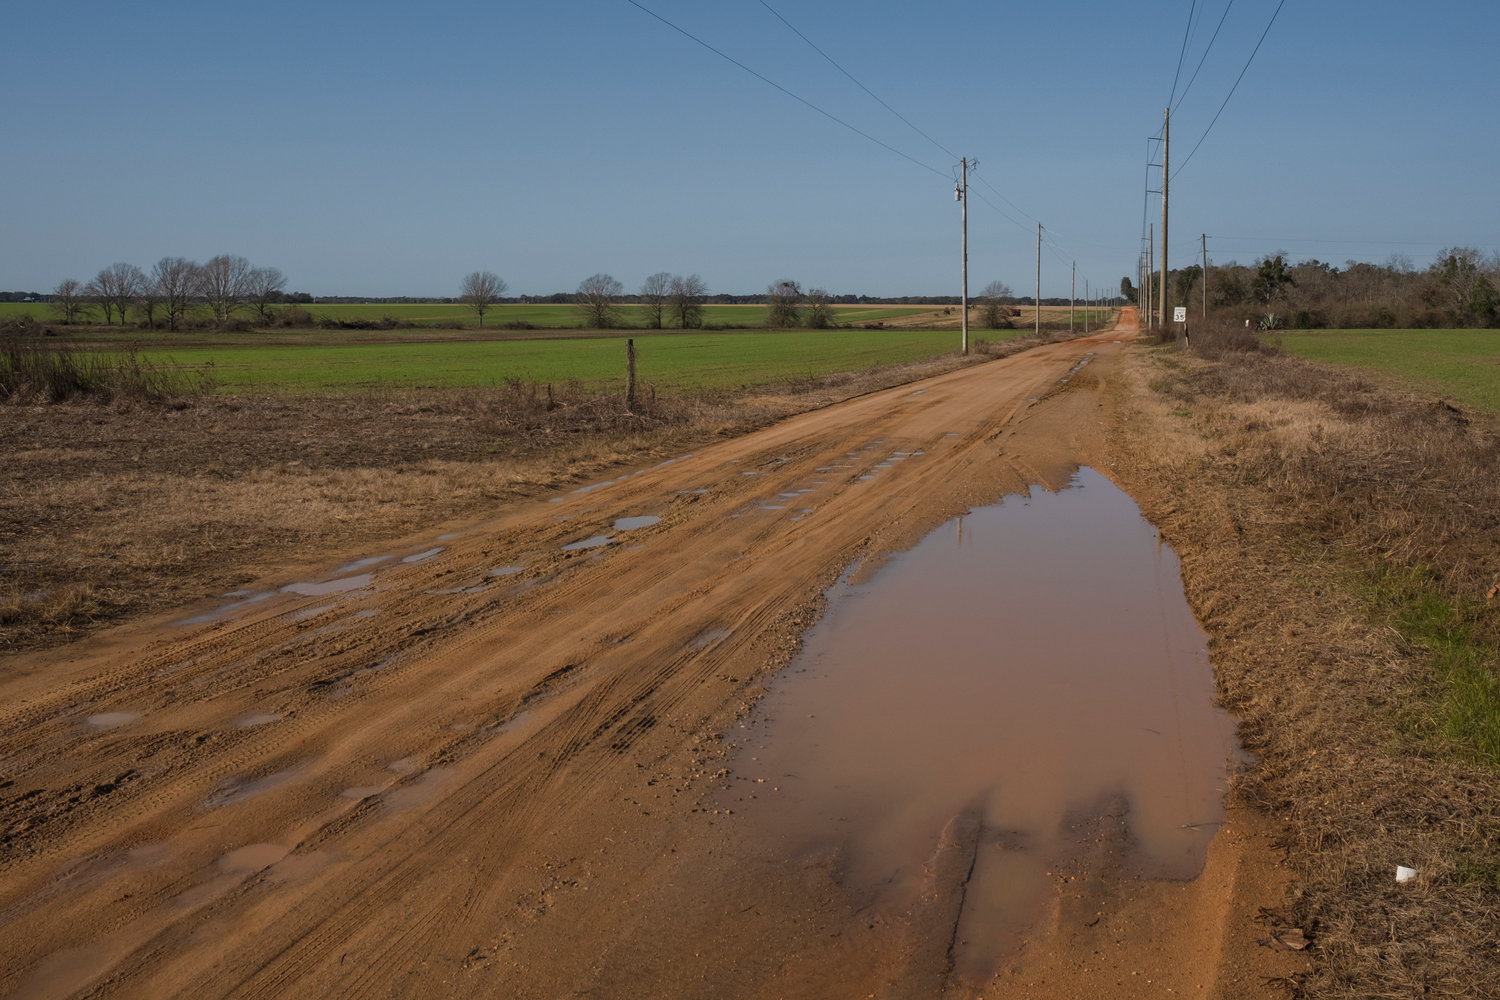 East Bay Road near Magnolia Springs is seen Jan. 4. Dirt roads like this that have been deemed among the most environmentally damaging in Baldwin County are an issue for taxpayers because when erosion washes material away, it has to be replaced.